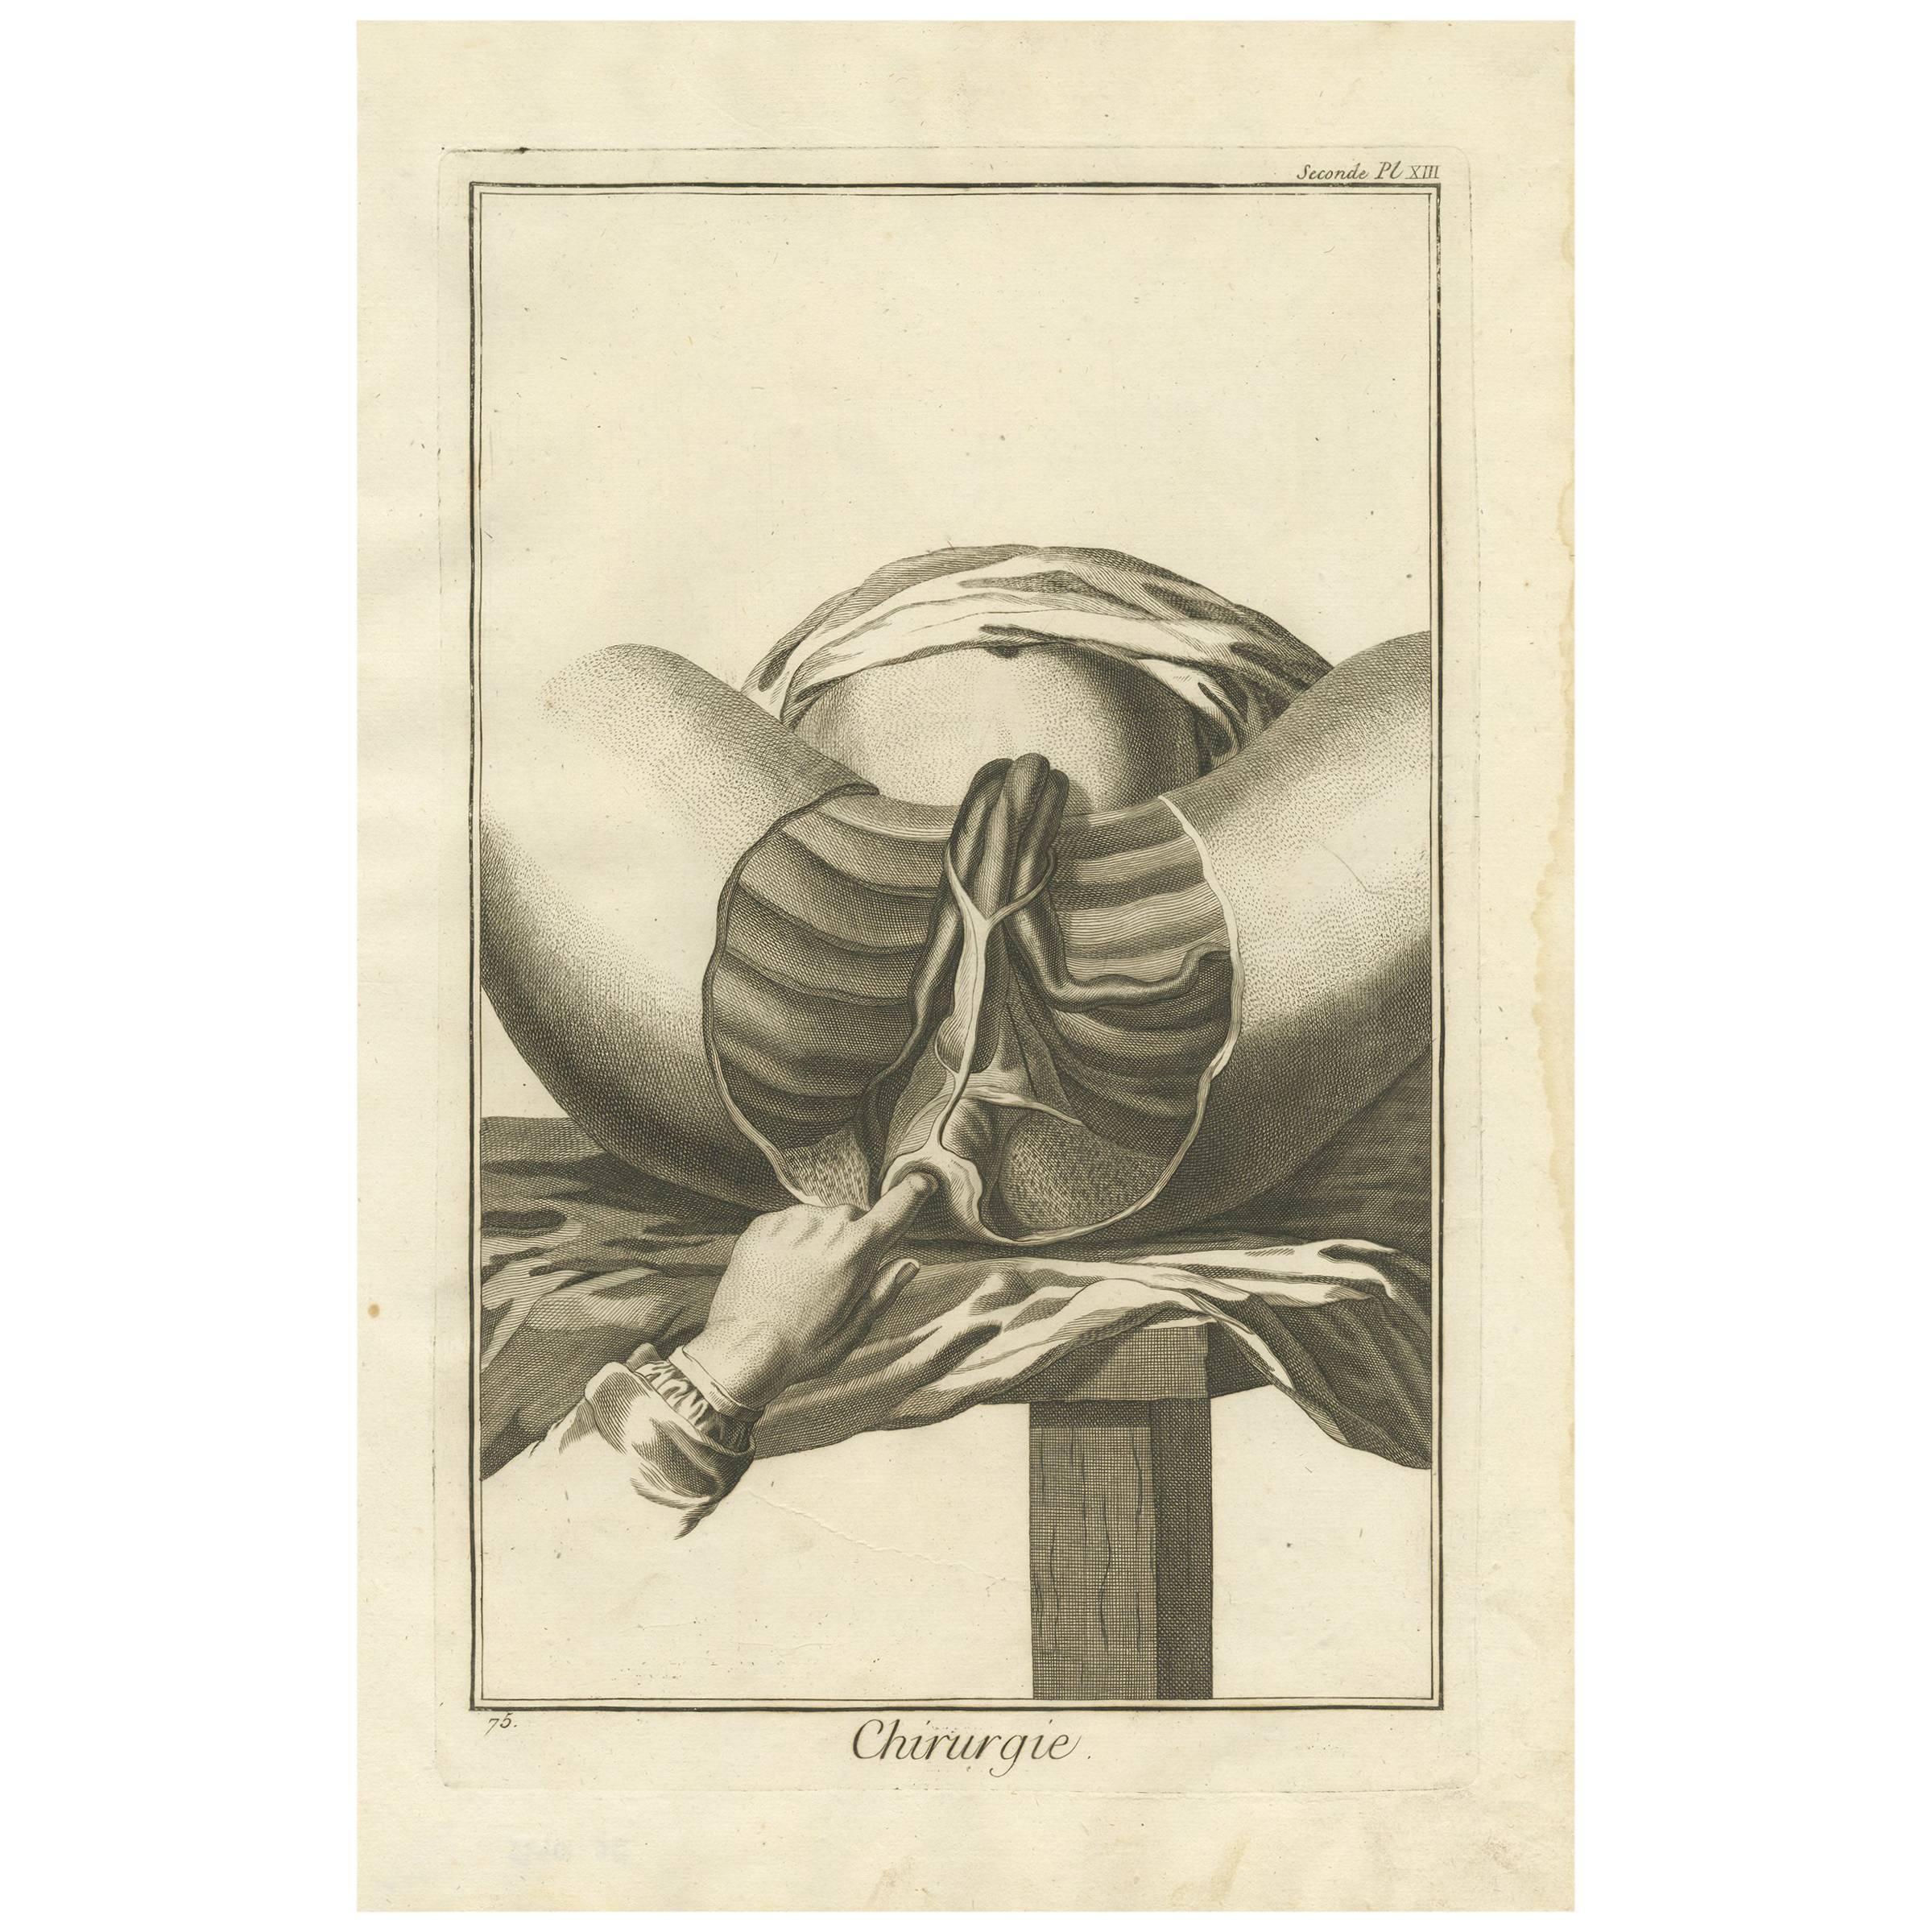 Antique Medical Print 'Seconde Pl. XIII' by D. Diderot, circa 1760